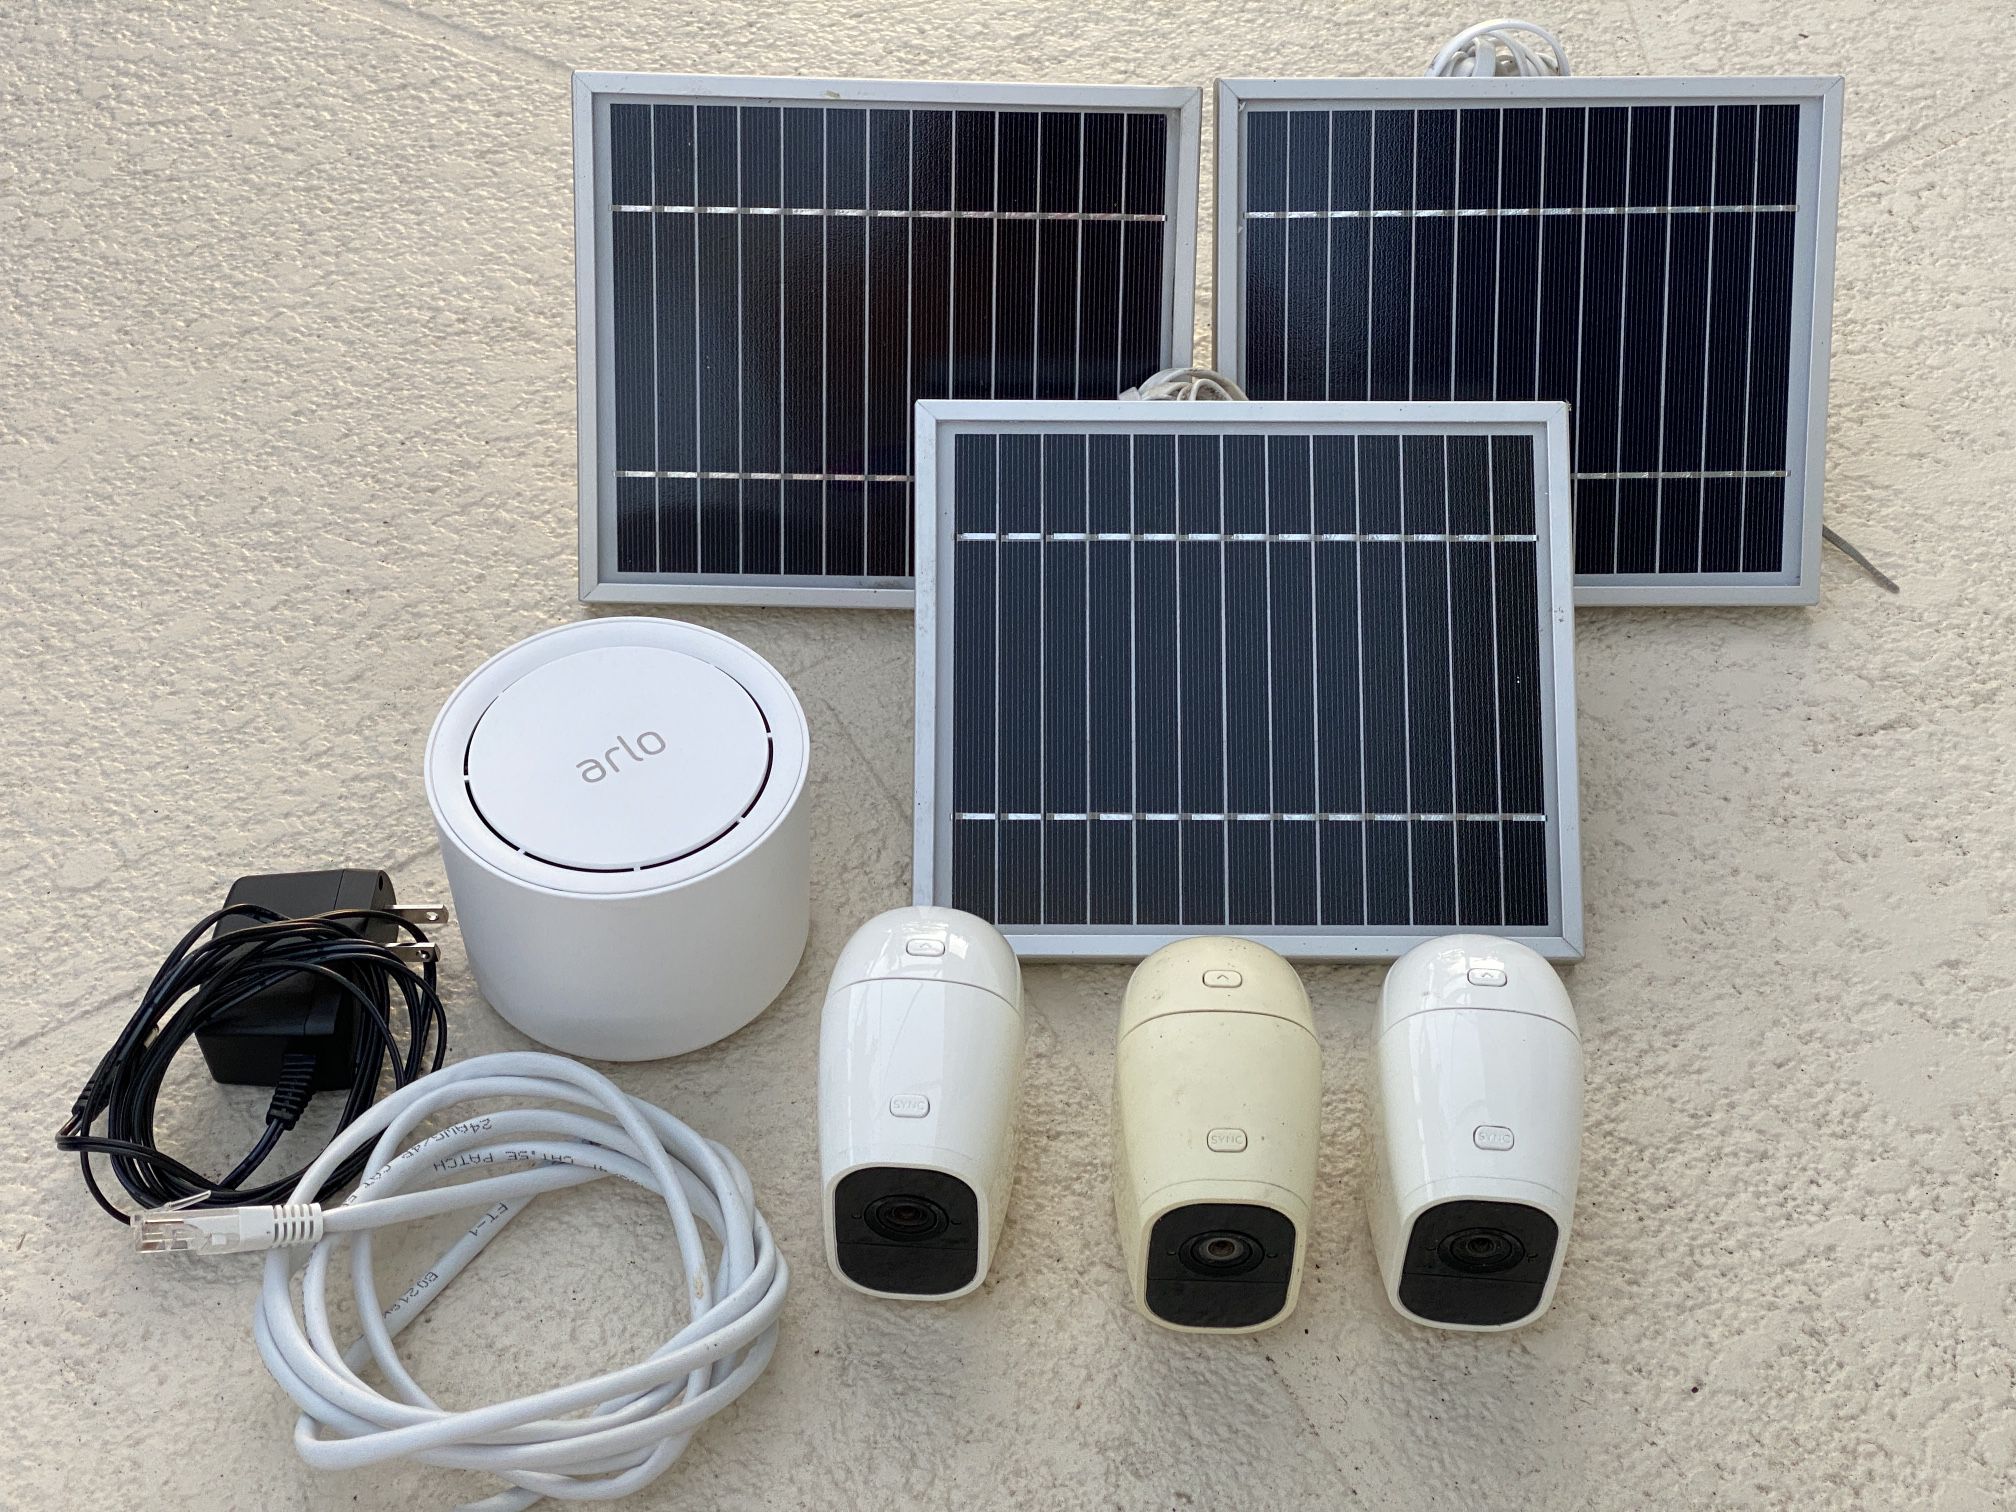 Wireless Arlo Kit of 3 security cameras, 3 solar panels and